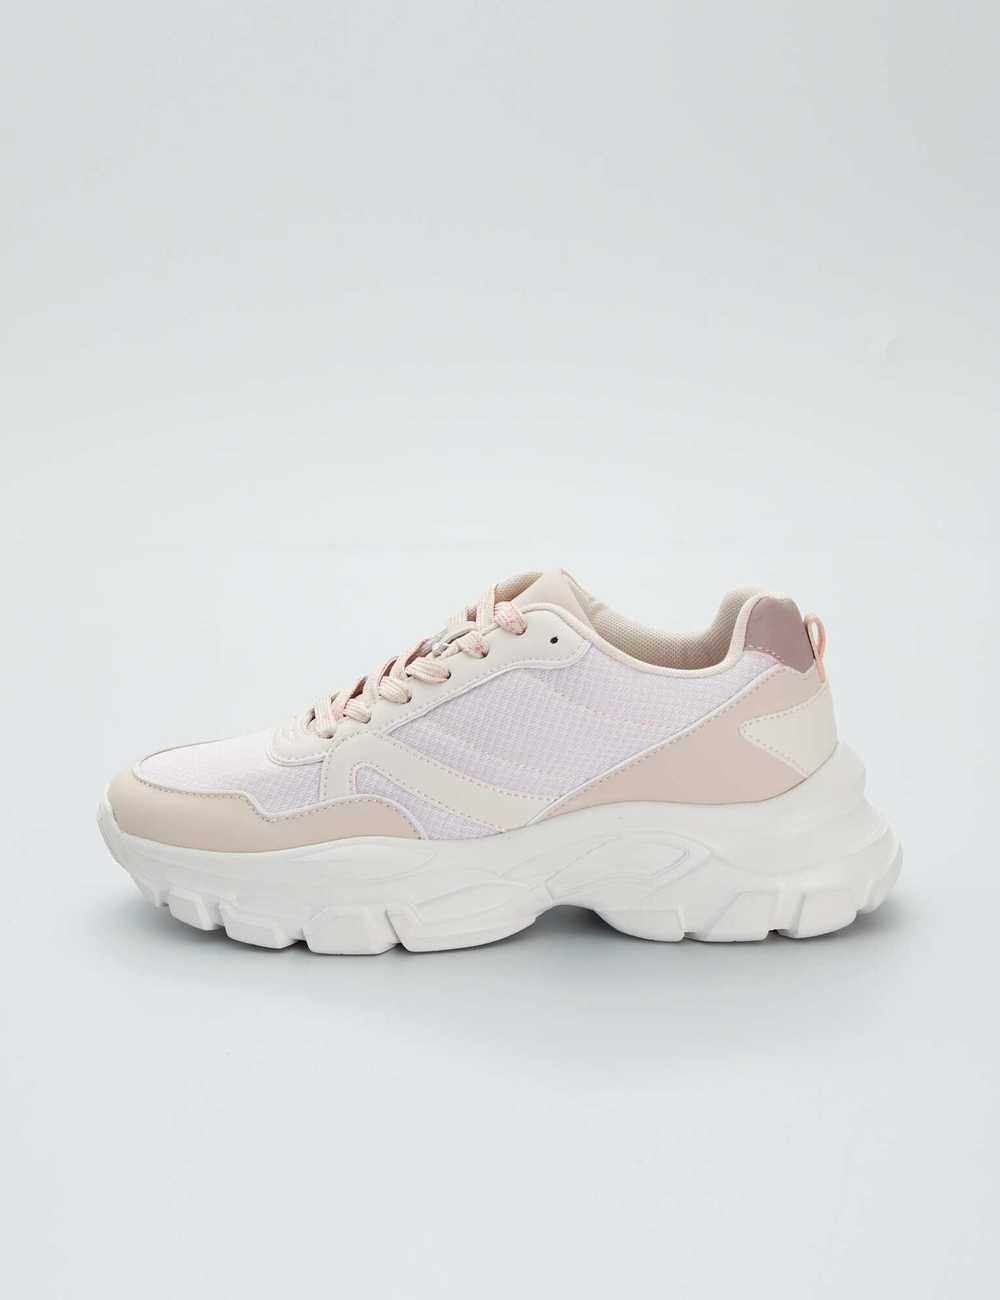 Misty Irrigation Controversy Buy Running-style trainers with chunky soles Online in Dubai & the UAE|Kiabi